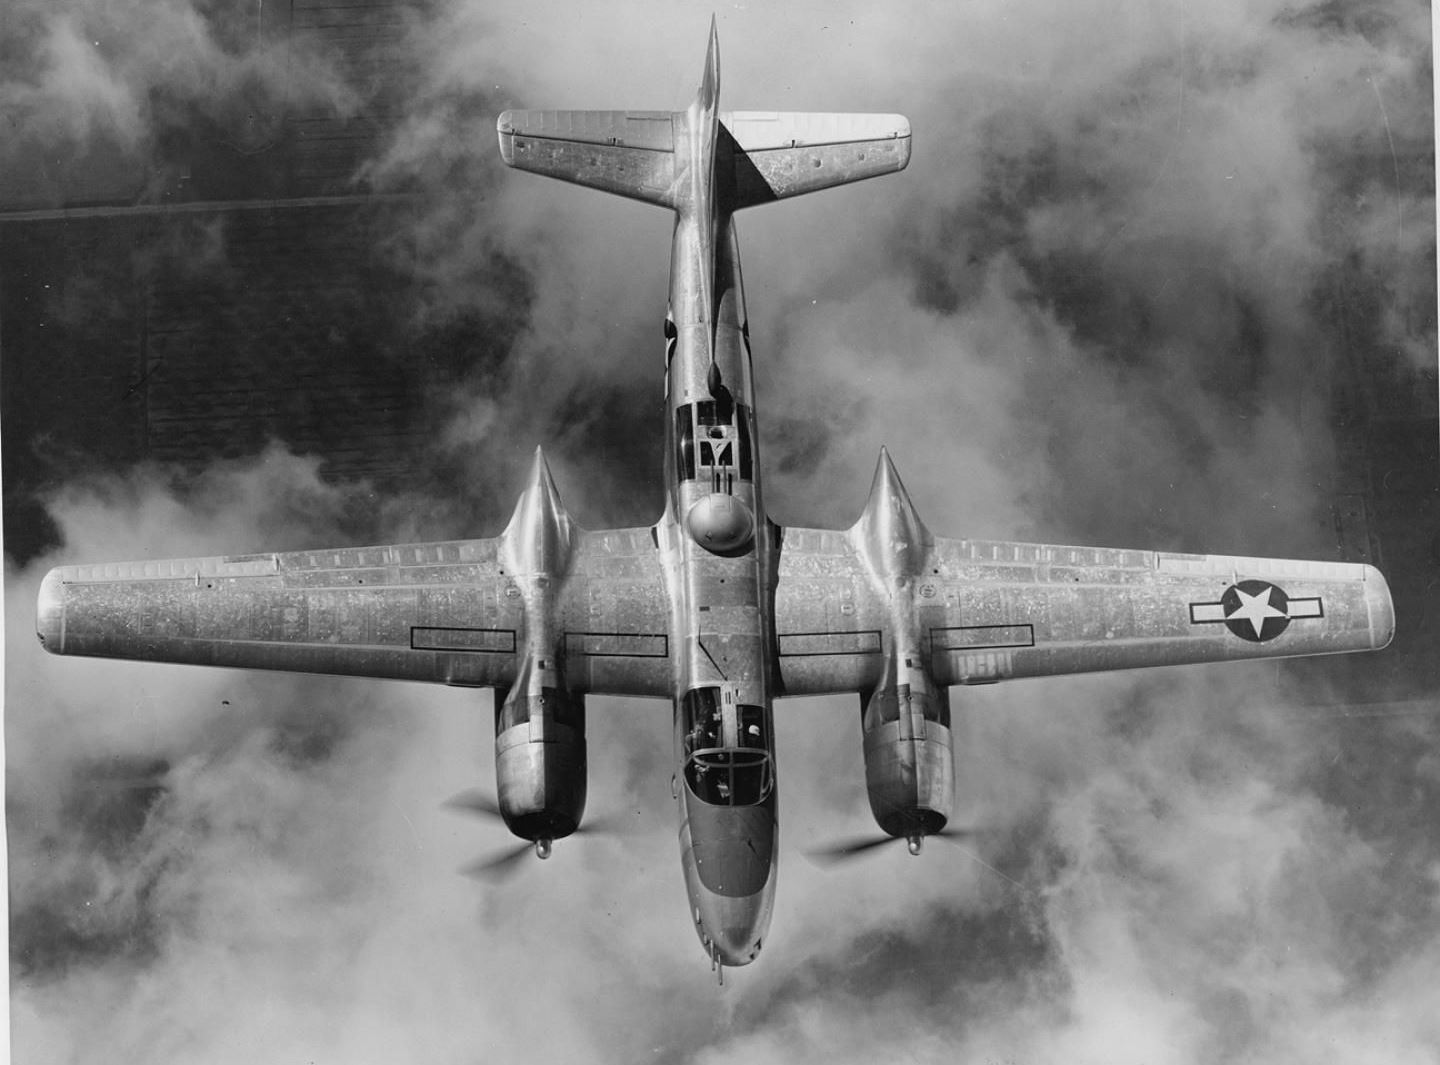 The XB-19: When Bigger Didn't Necessarily Mean Better